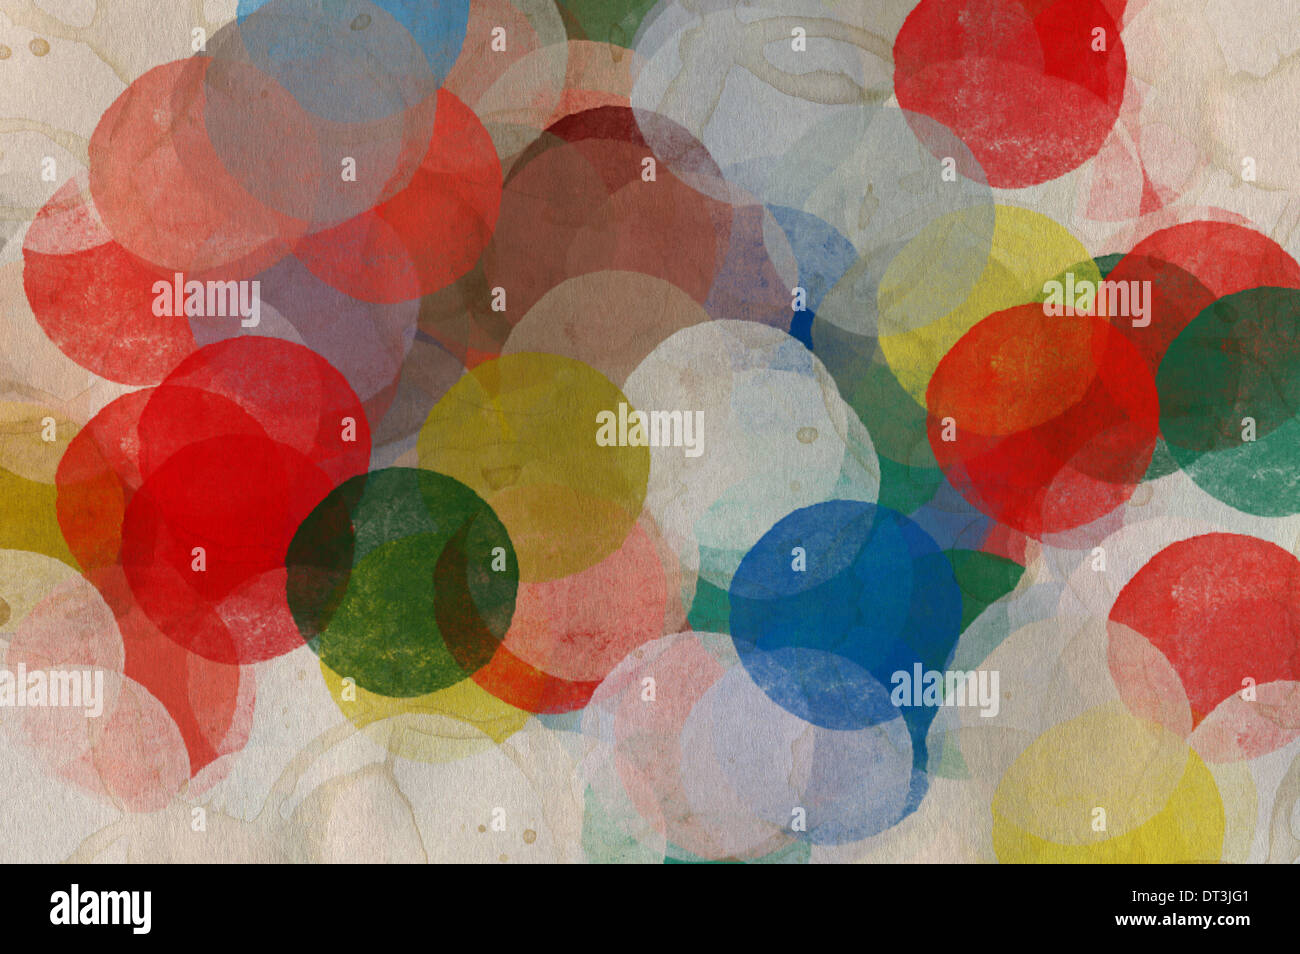 Abstract paint smudged circles illustration. Colorful grungy background. Stock Photo